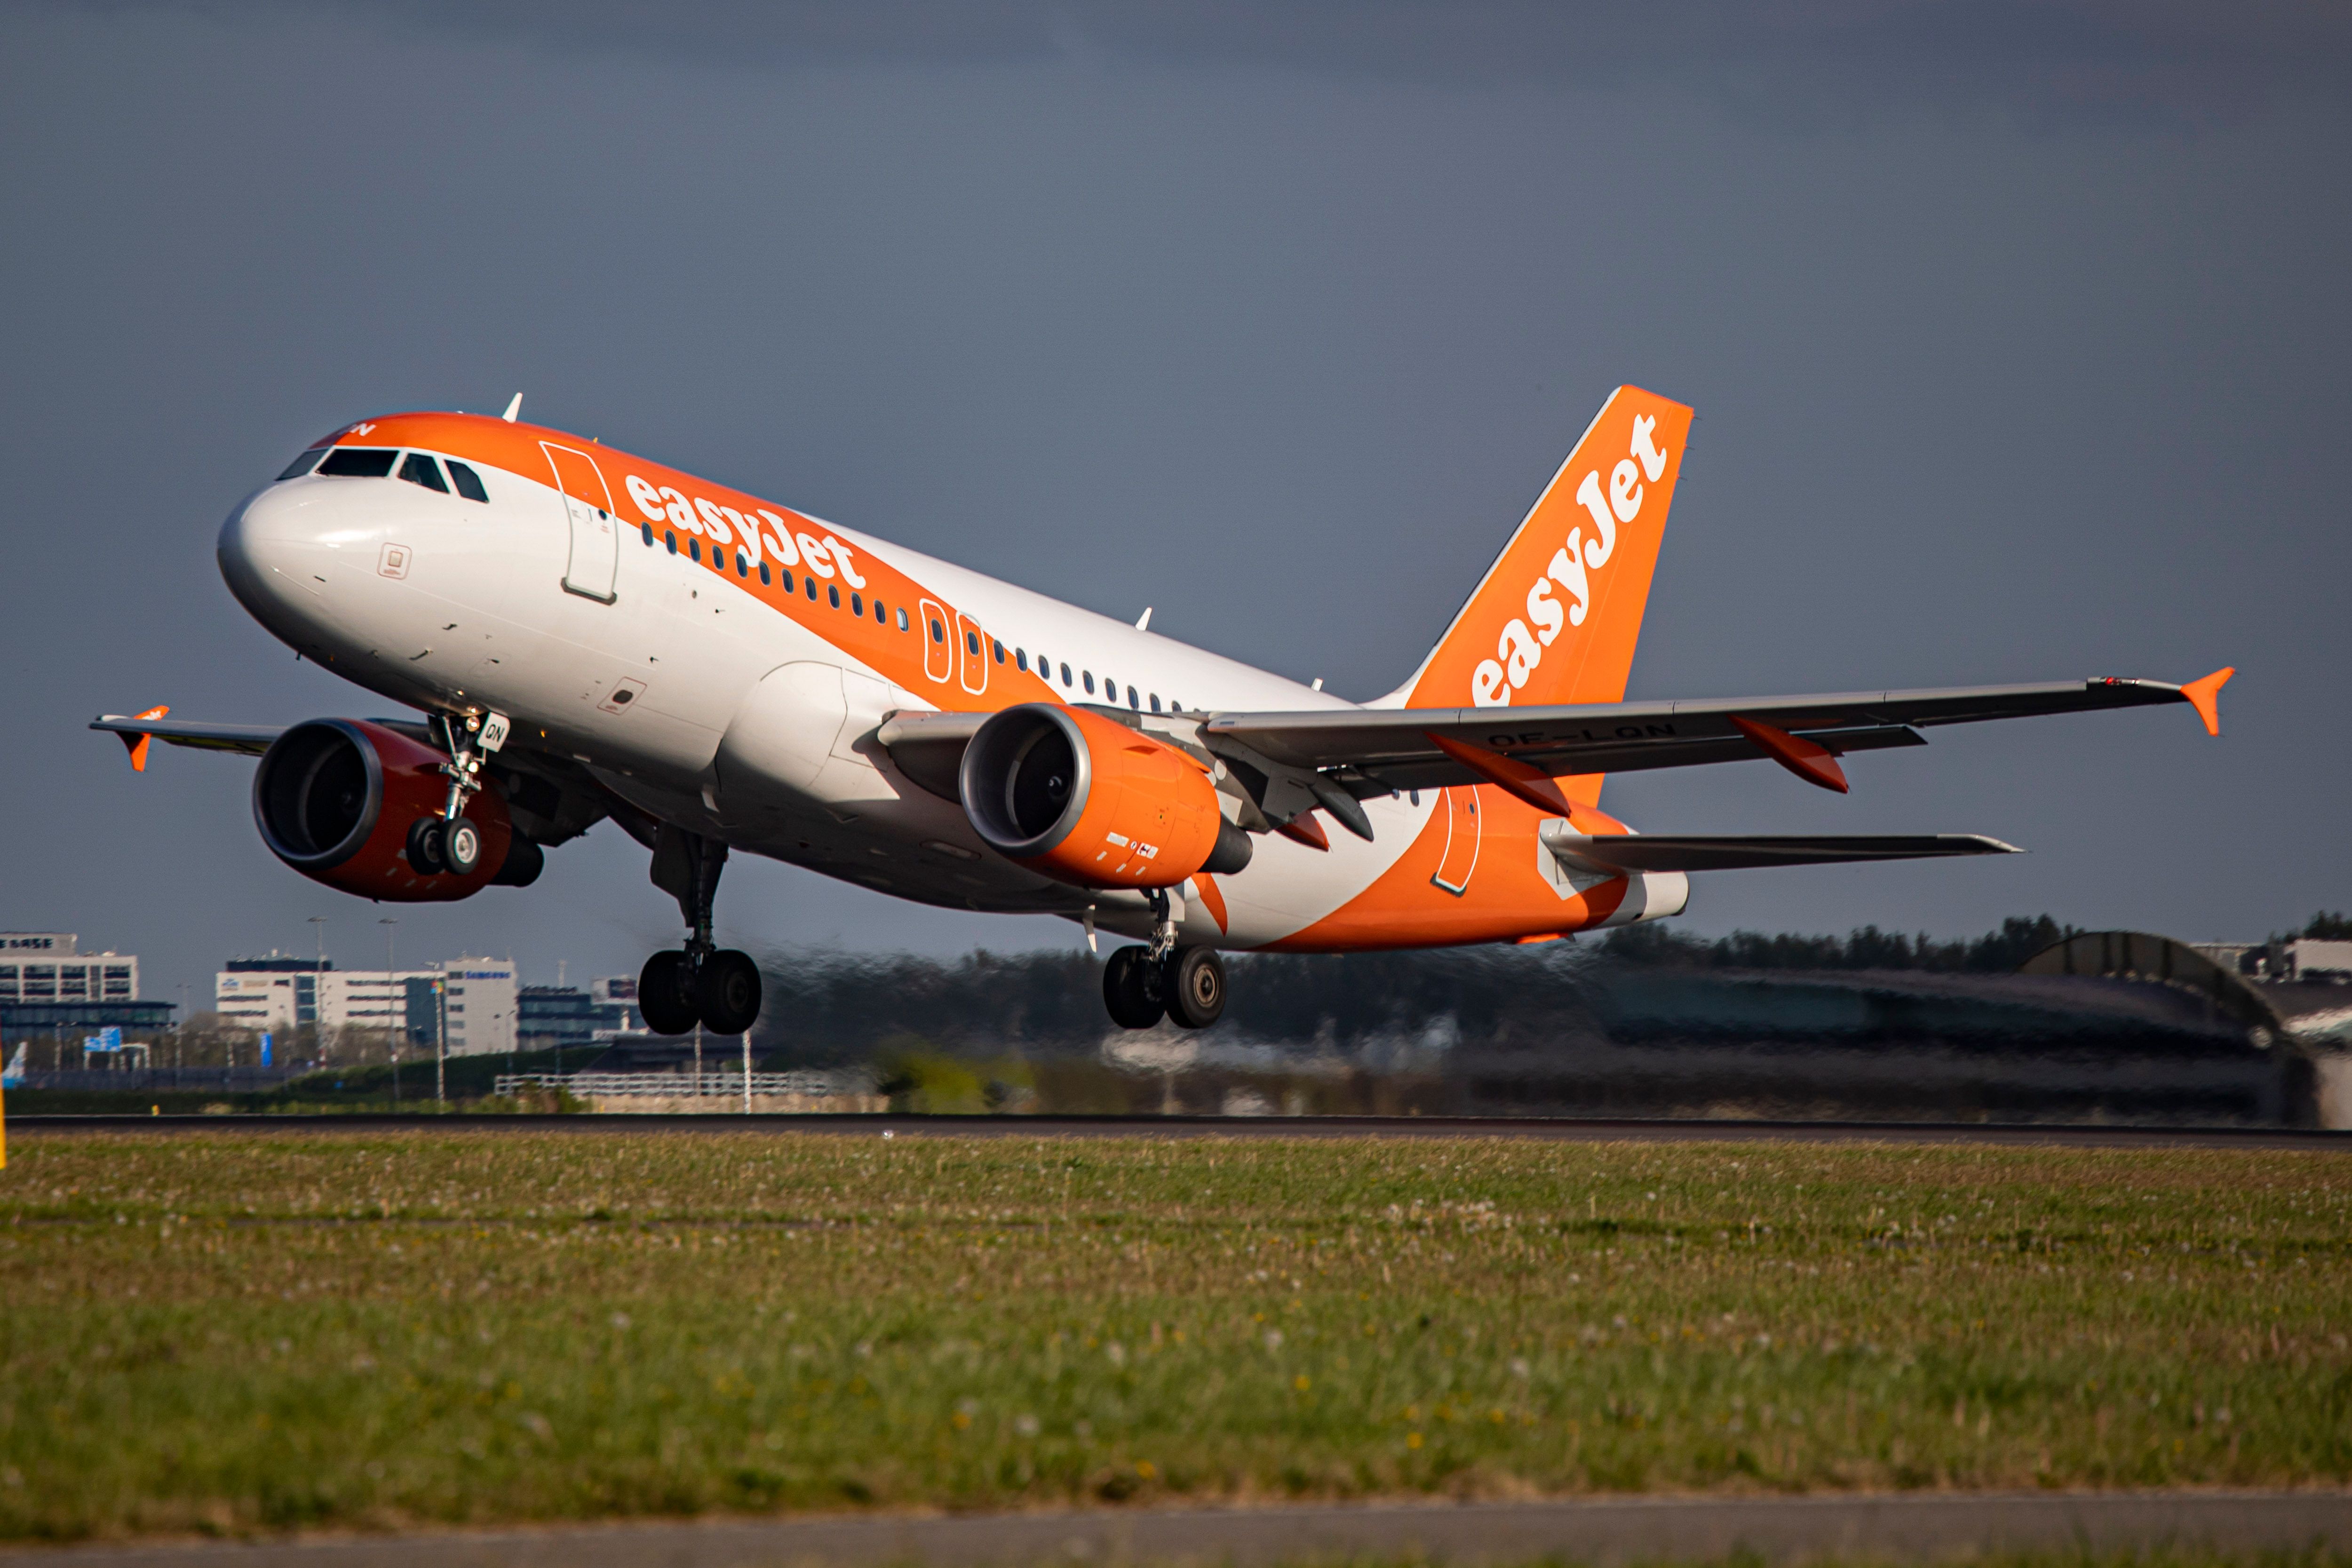 easyjet a319 taking off from runway